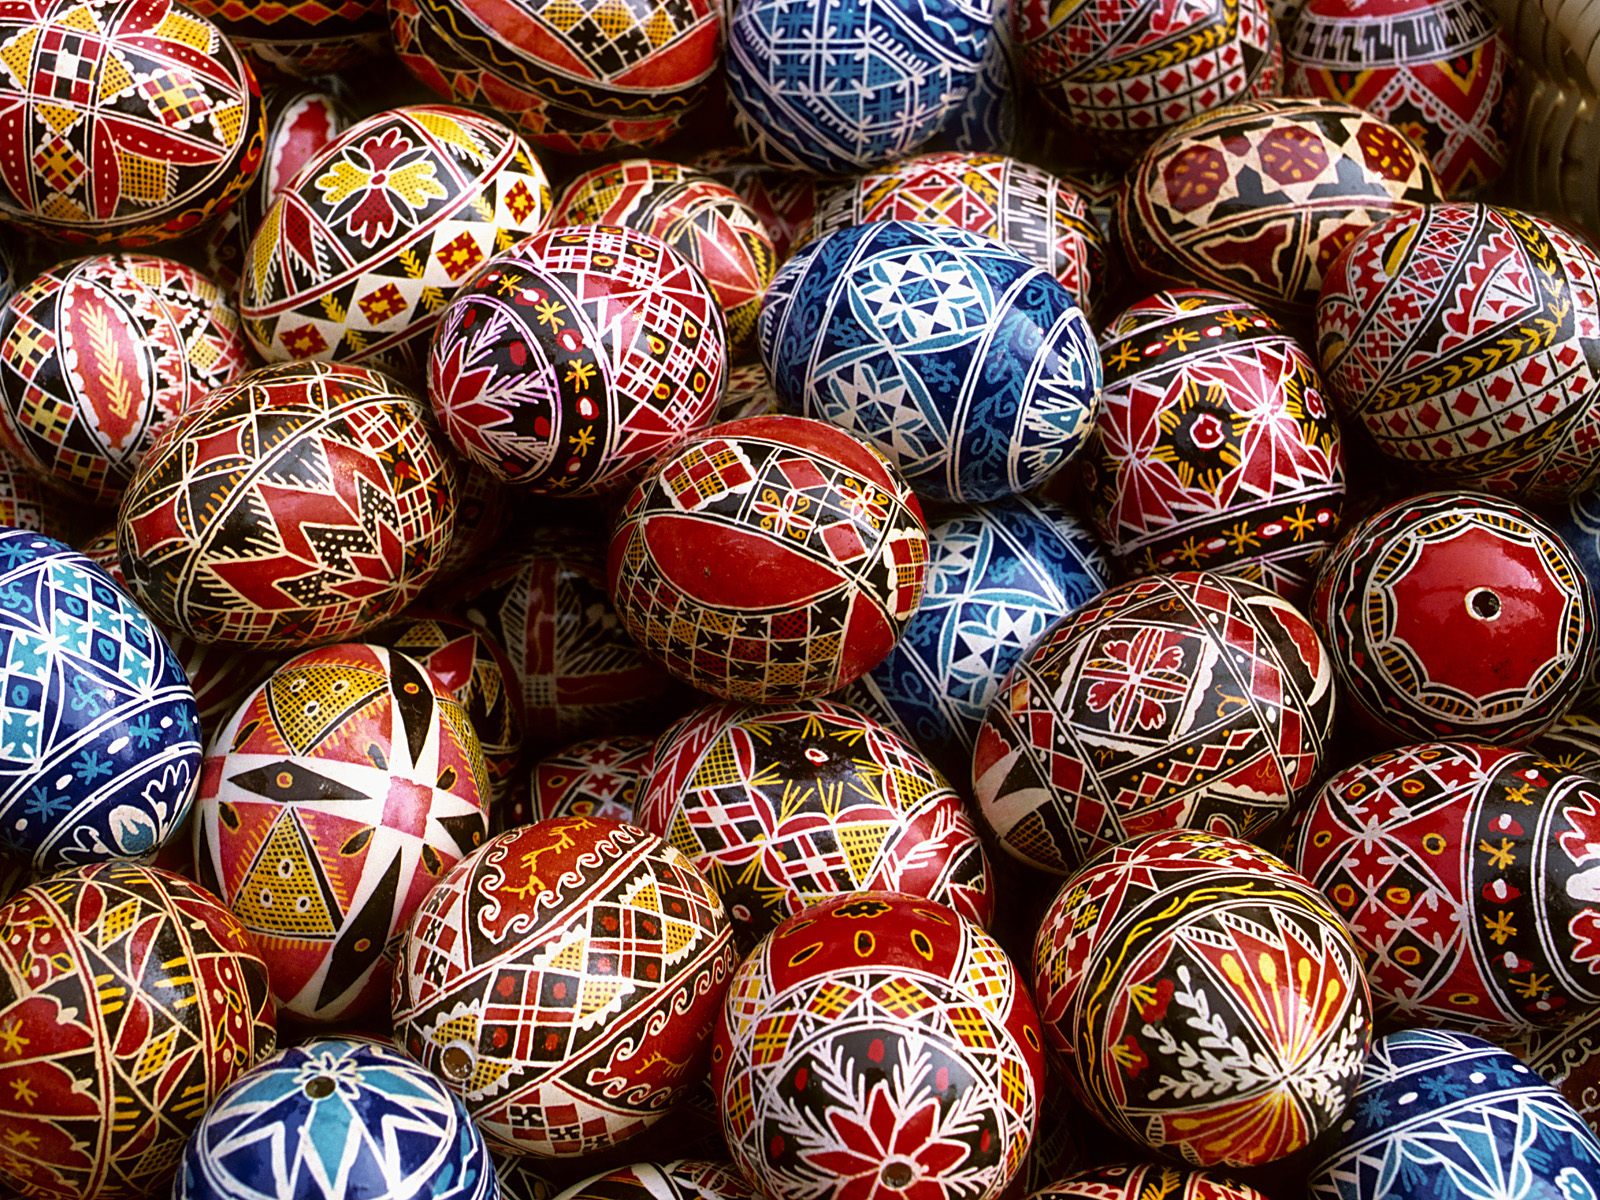 ... Eggs Decoration | Easter Eggs Pictures | Free Christian Wallpapers